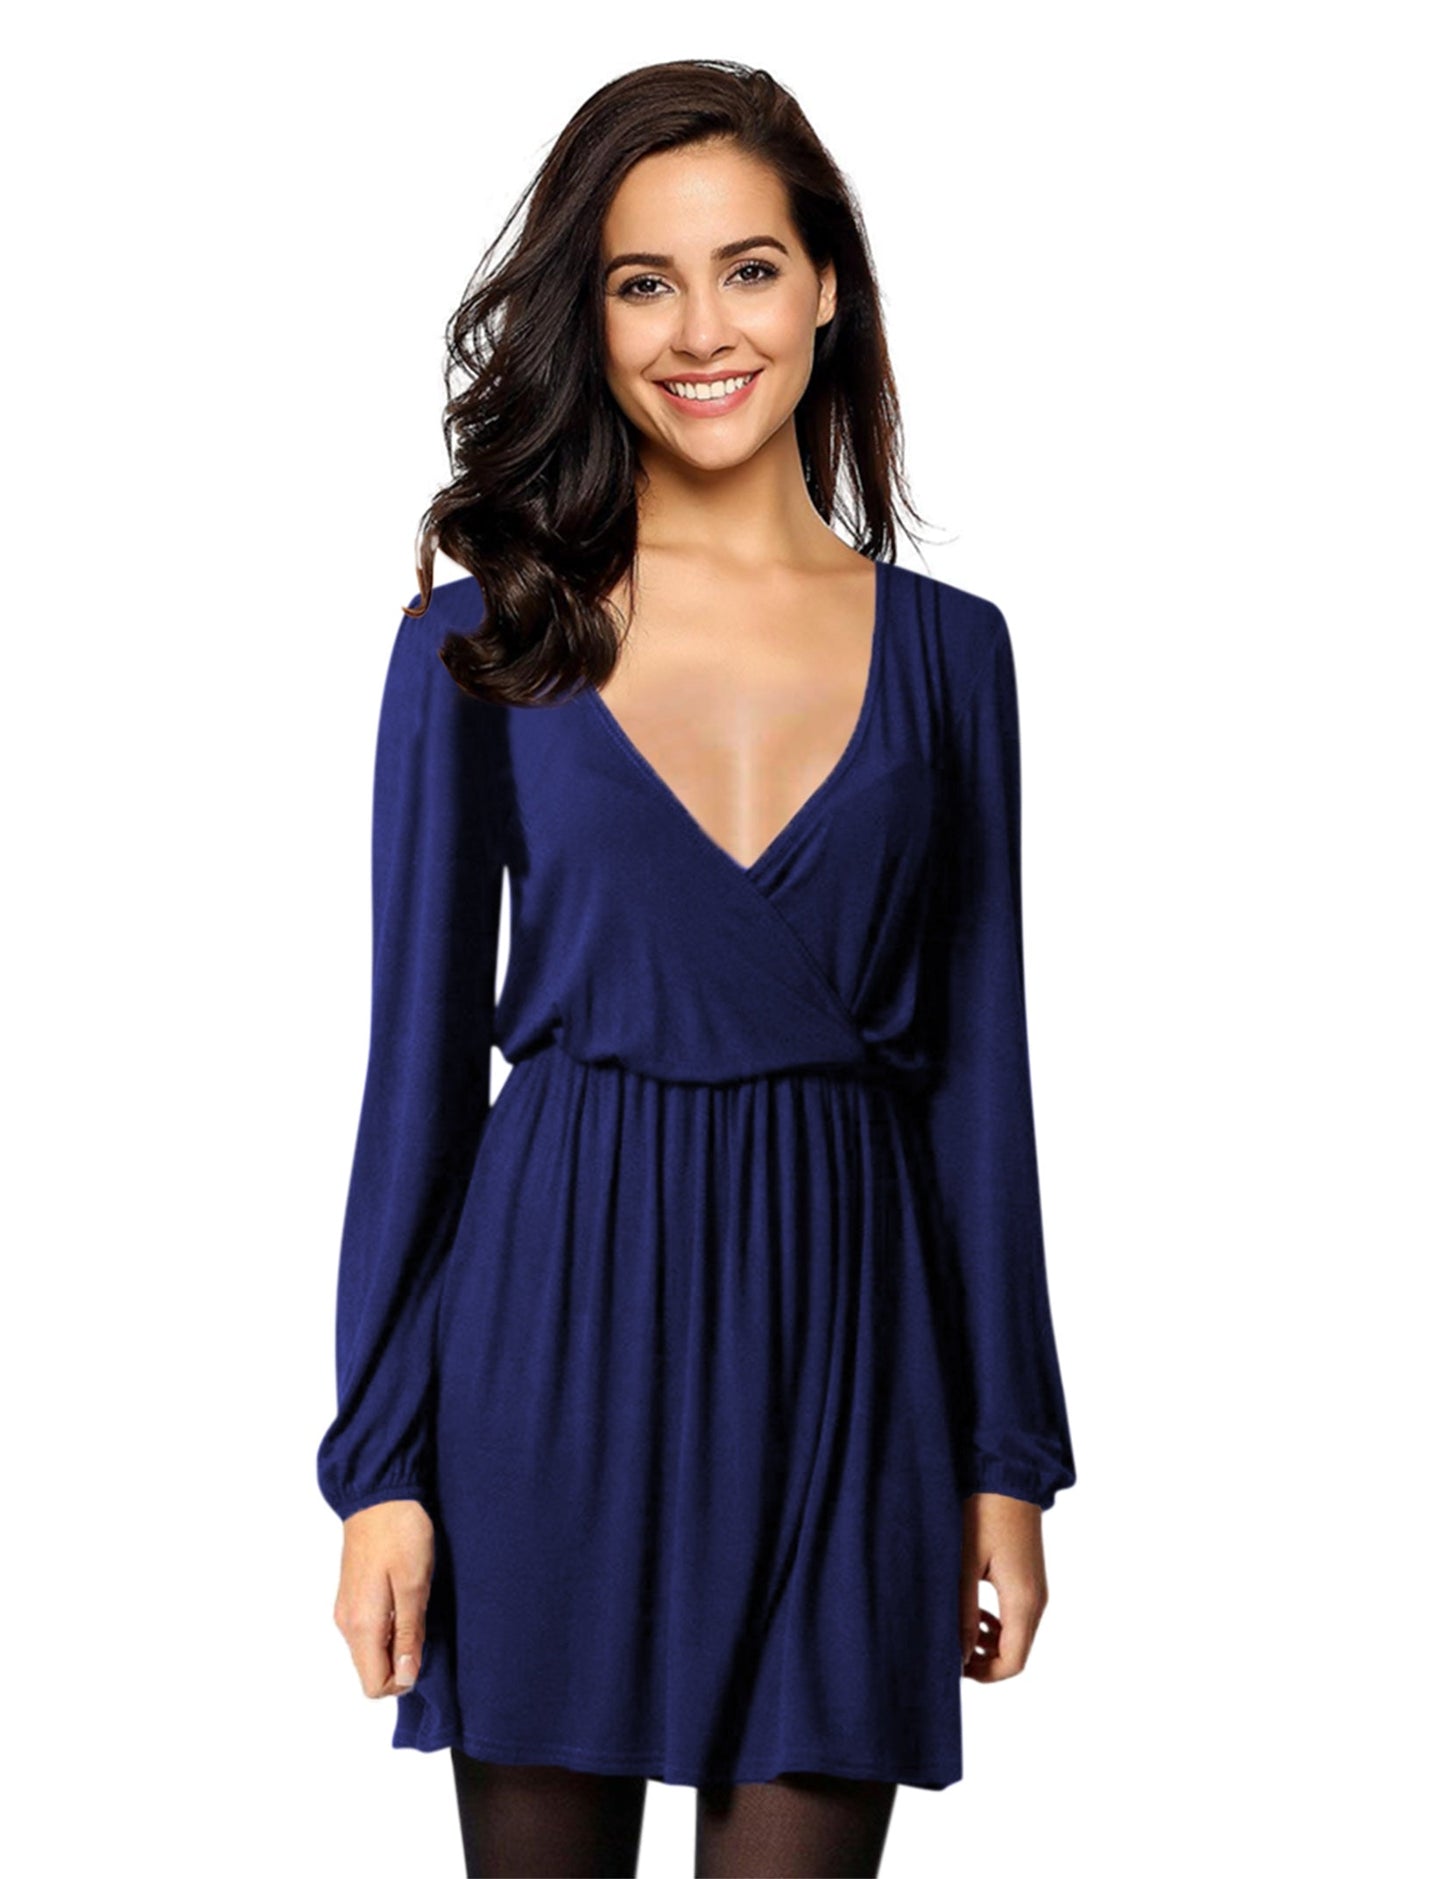 YESFASHION Women V-Neck A-Line Solid Plain Party Casual Mini Dress Blue